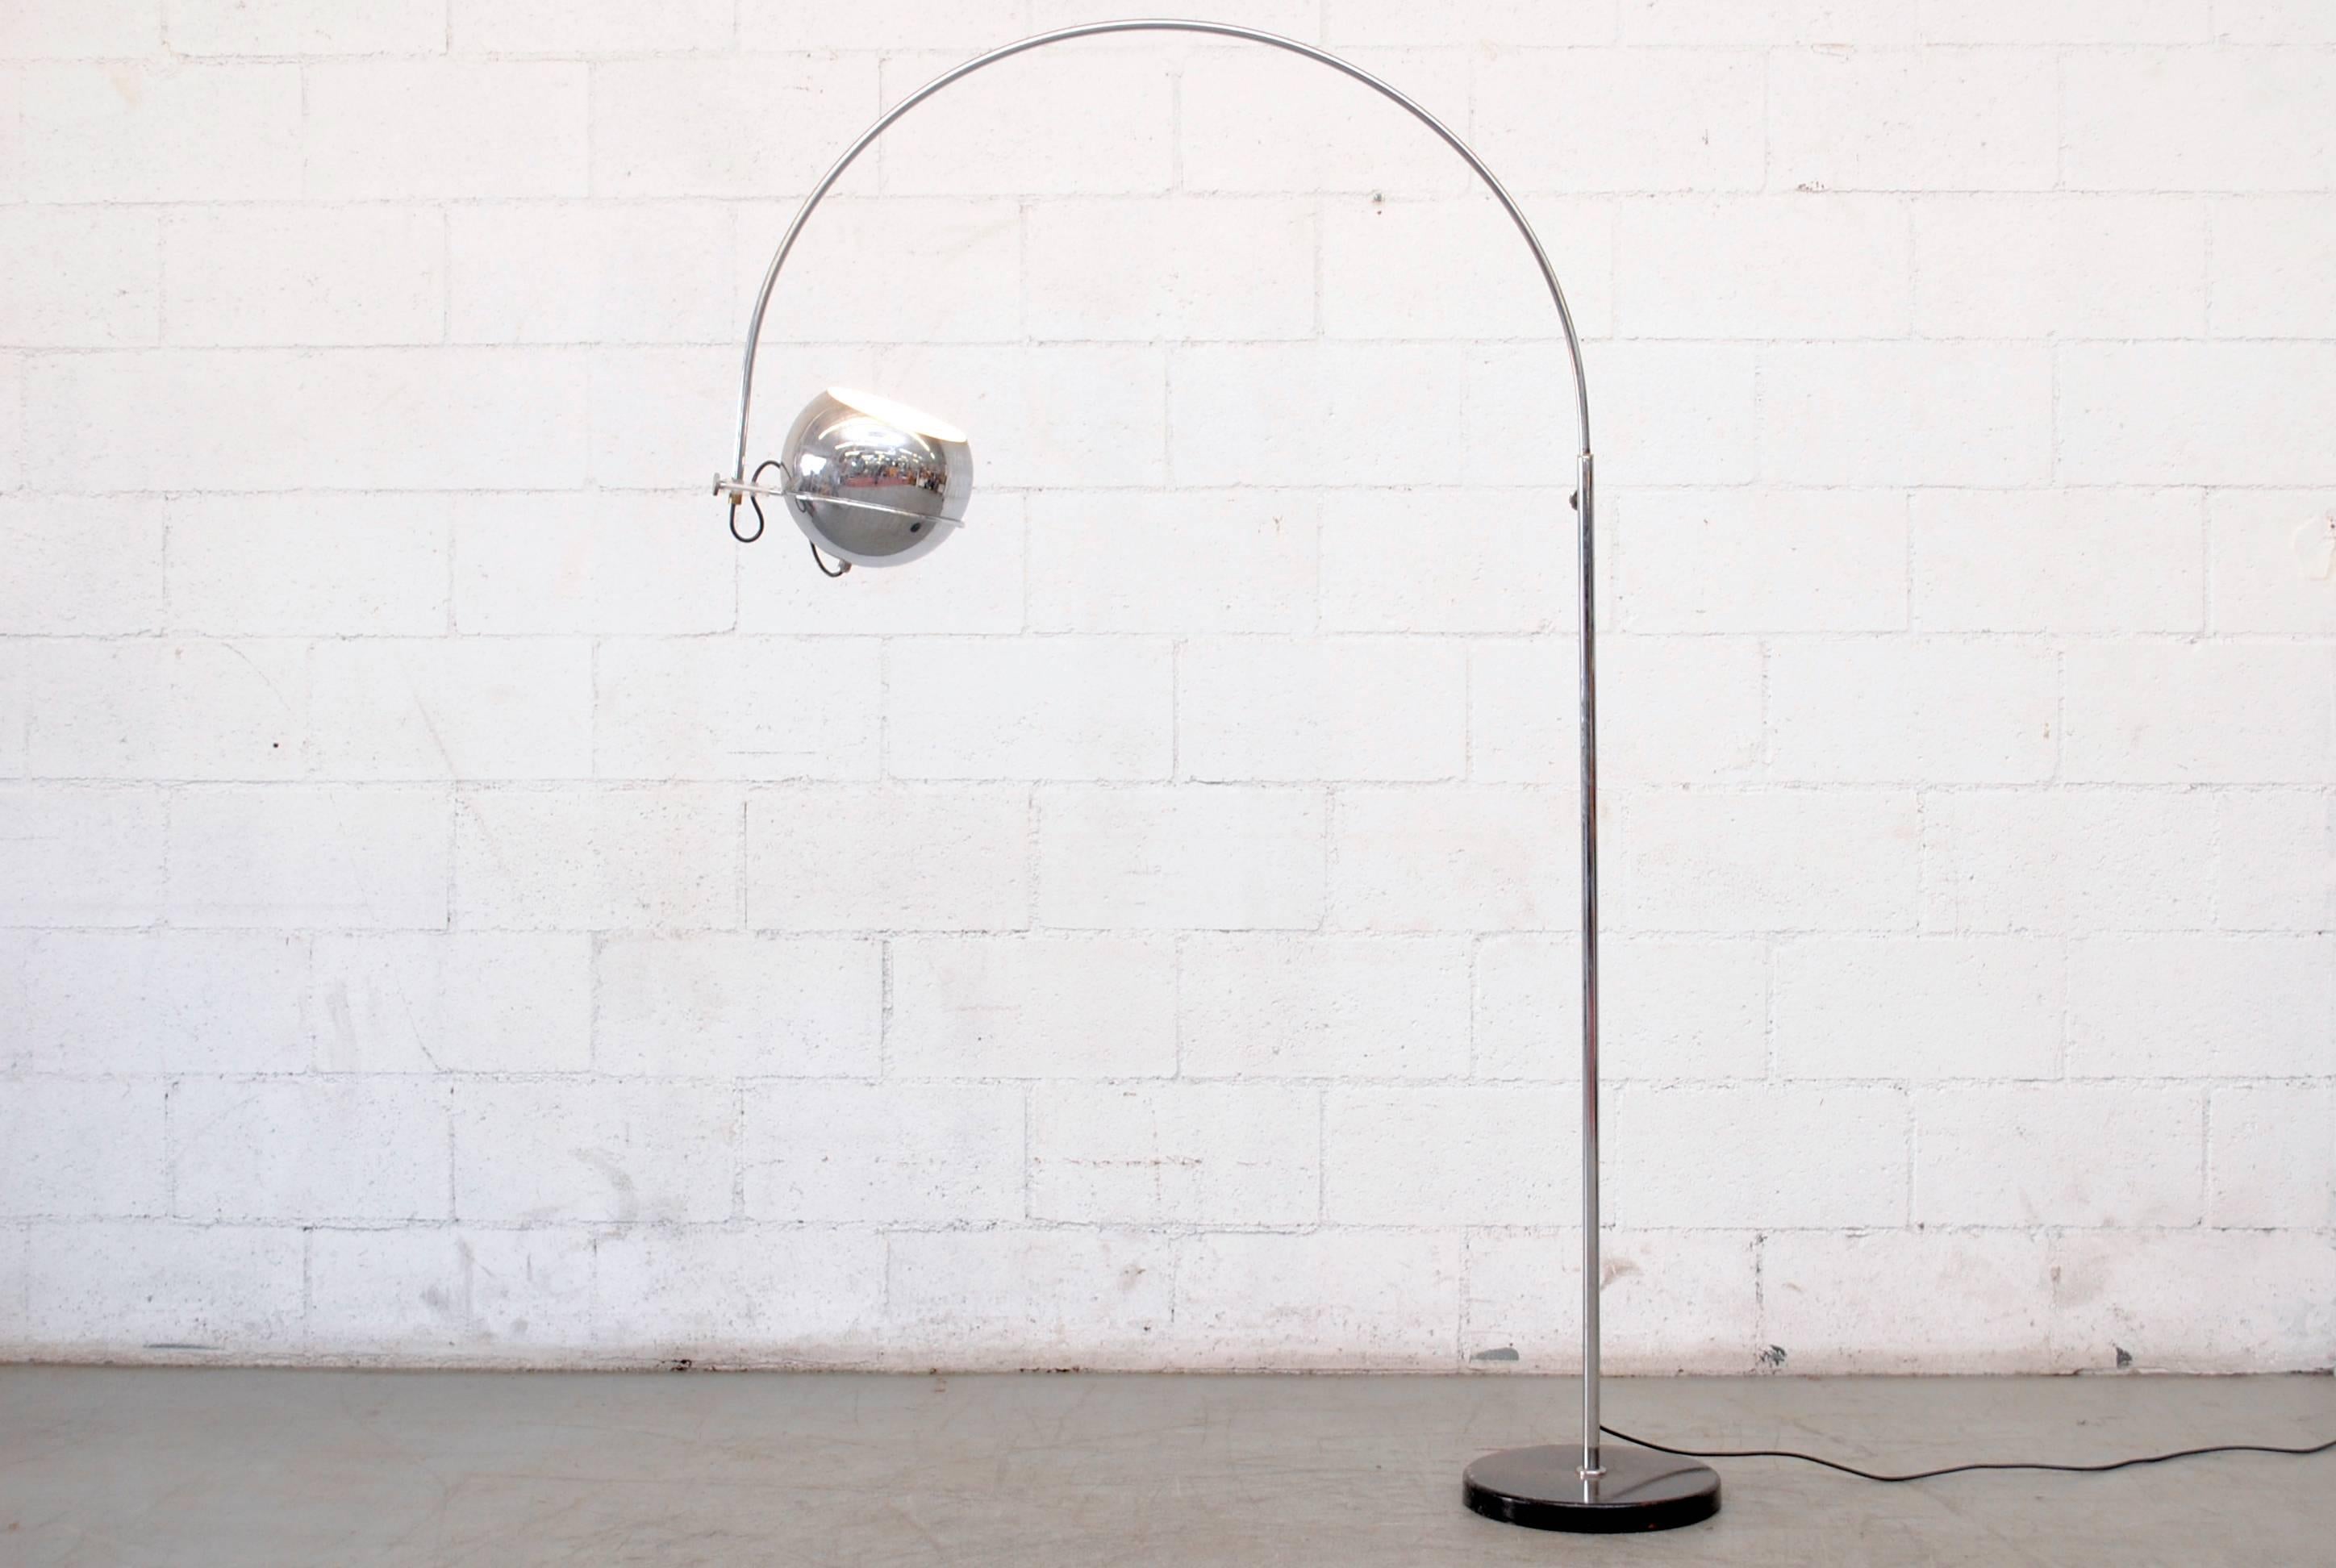 Chrome-plated standing floor lamp with single chrome globe. Adjustable height. Acrylic detail and black enameled metal weighted base. In original condition with some signs of wear, minimal enamel loss and some wear to the chrome.